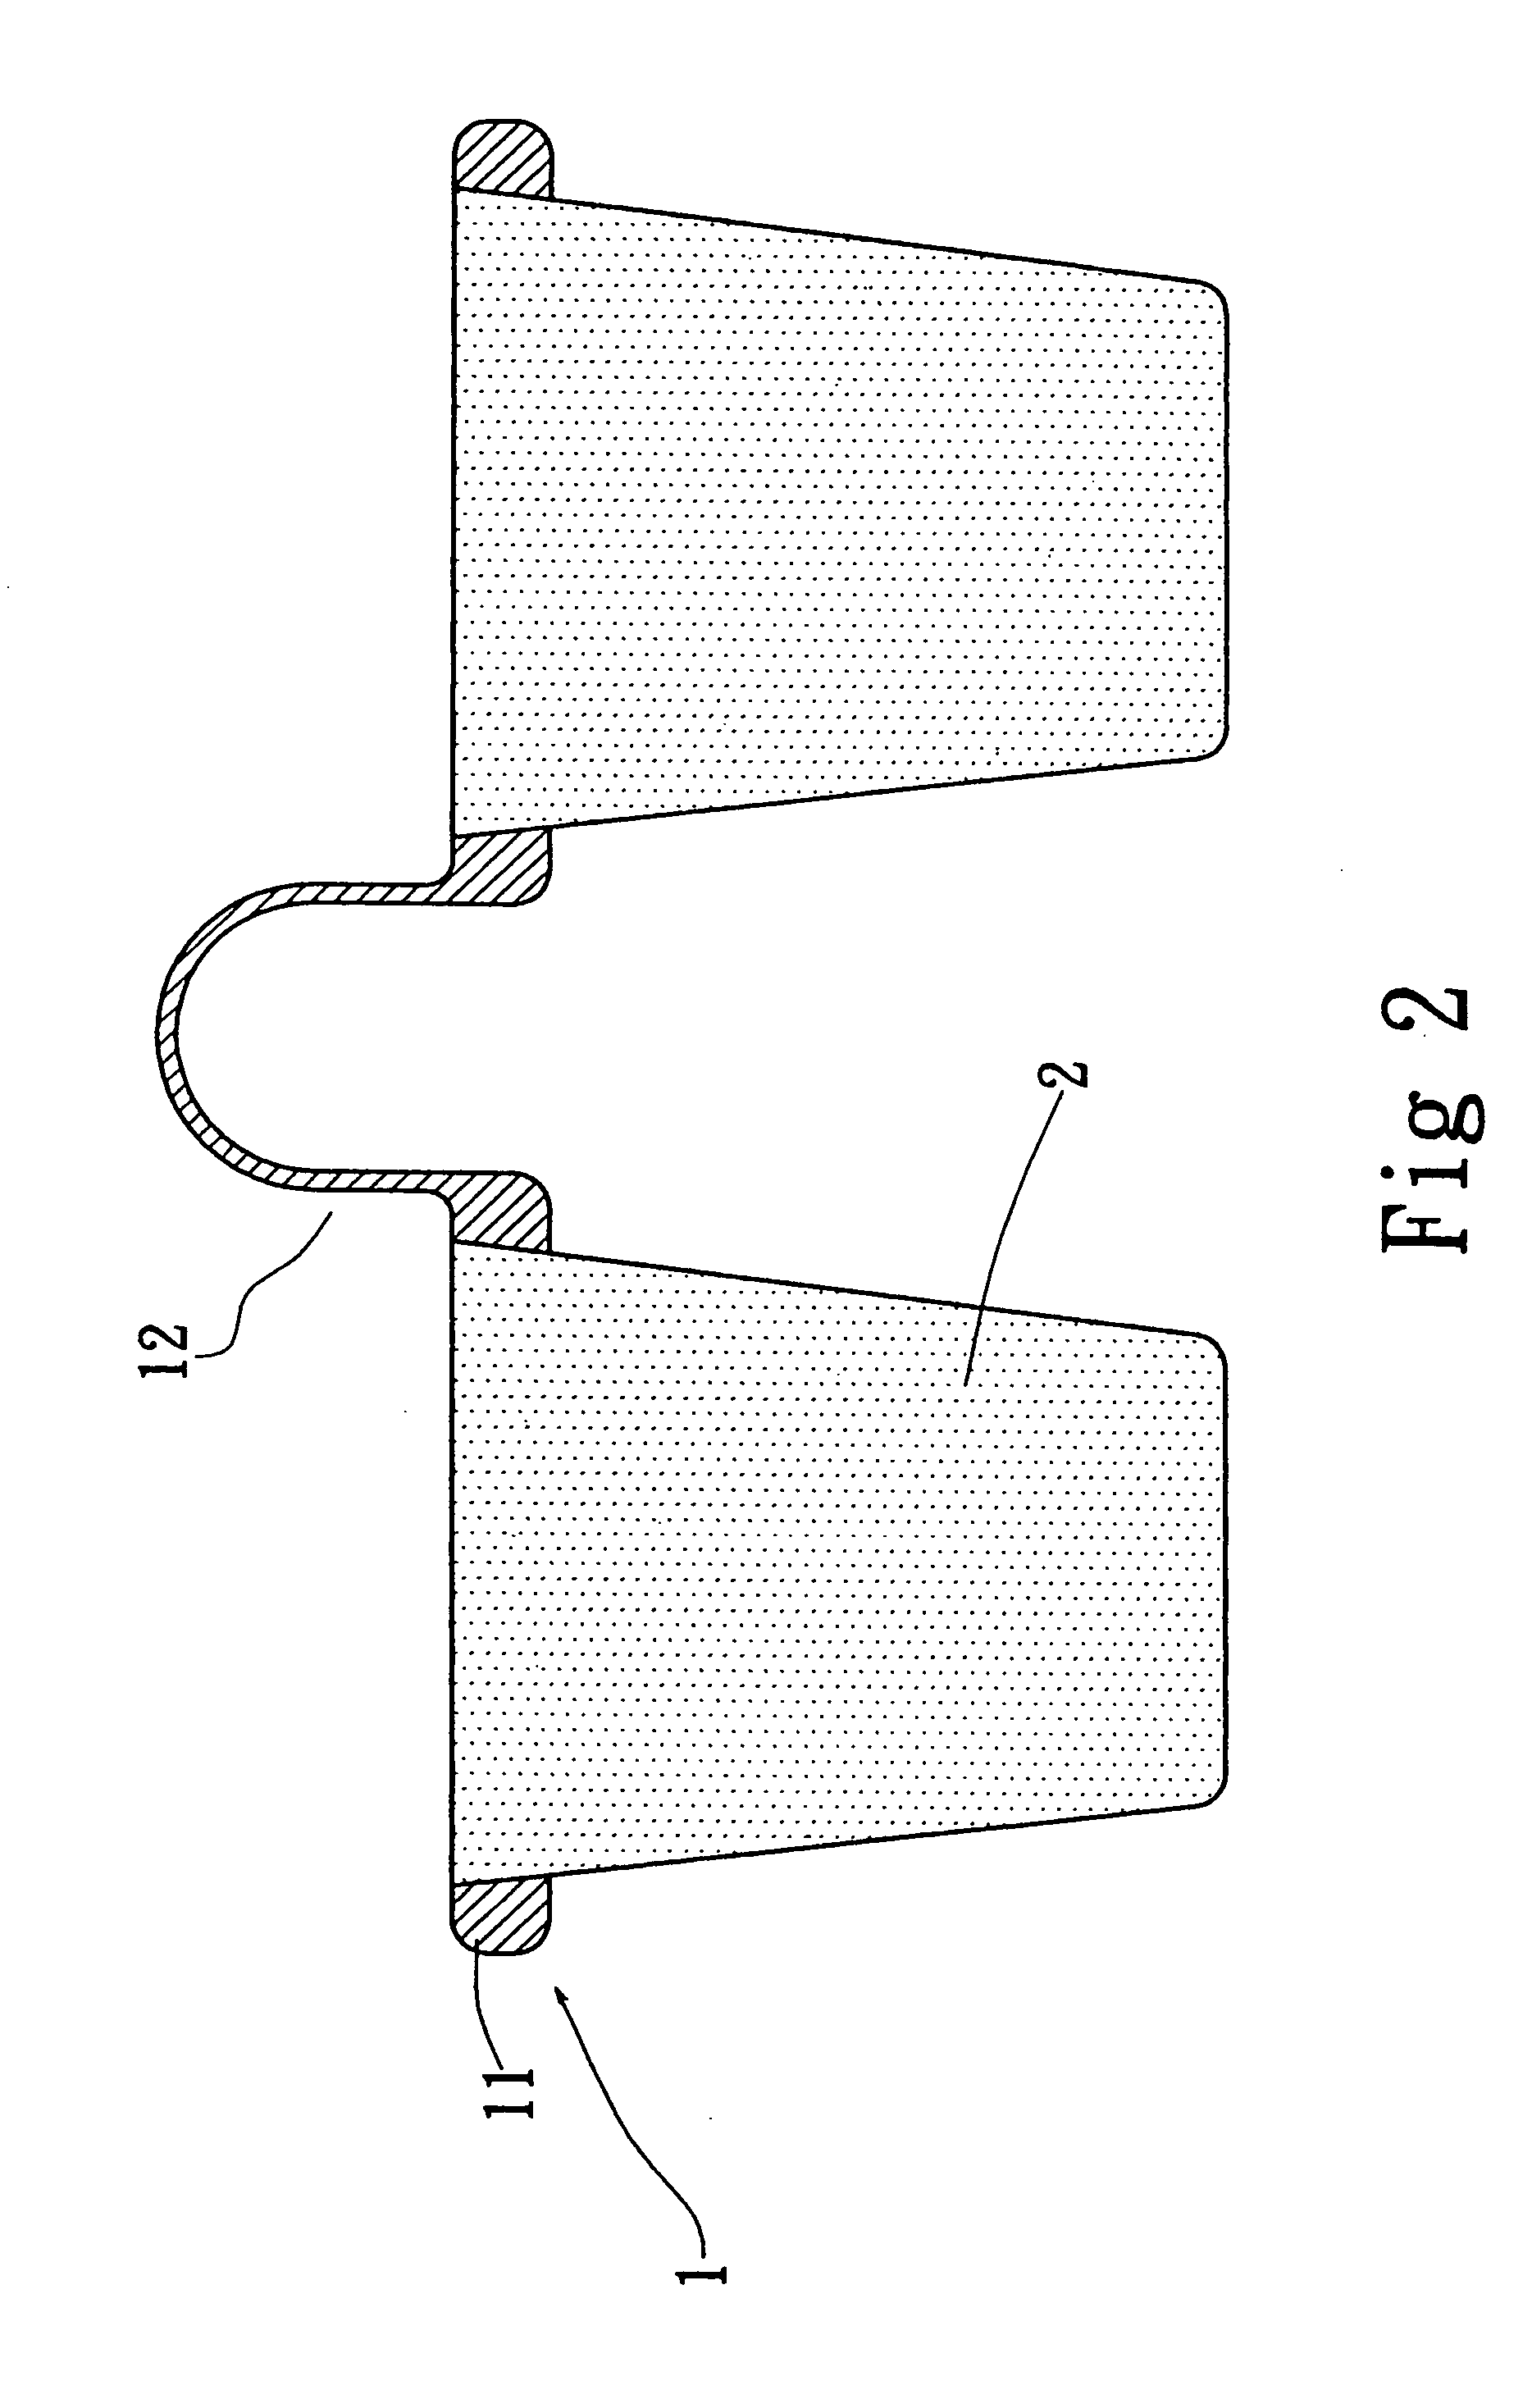 Filtering assembly in nasal cavities